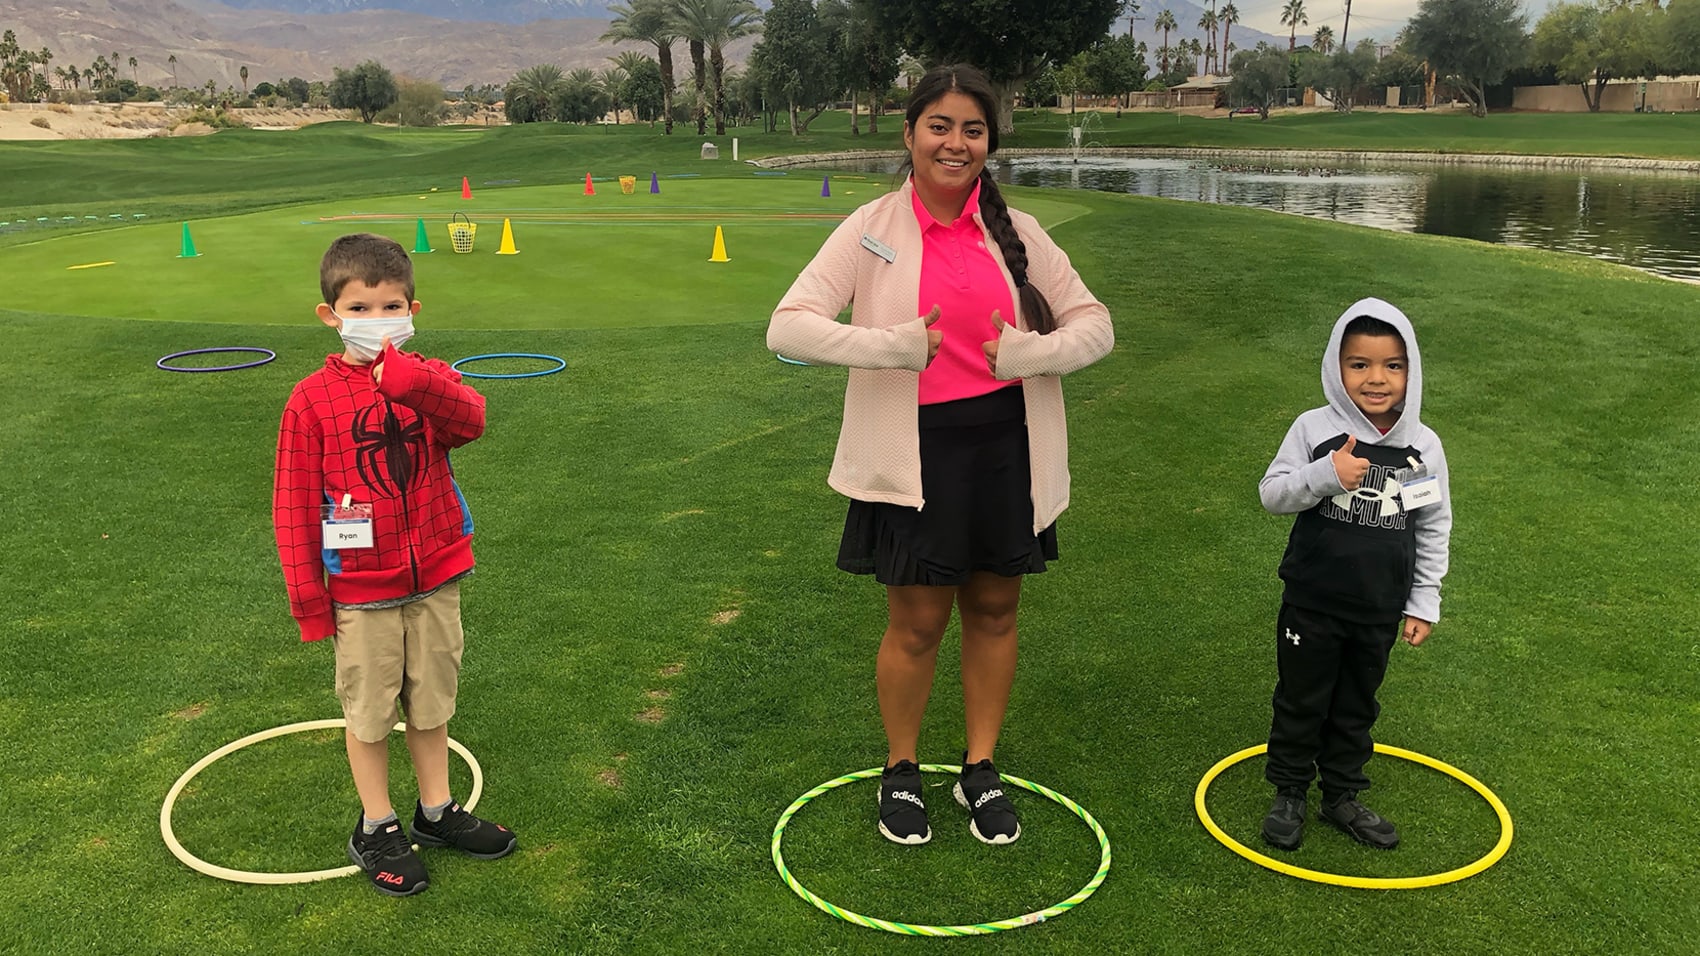 Karla Garcia is the Lead Instructor at First Tee Coachella Valley. (First Tee Coachella Valley)